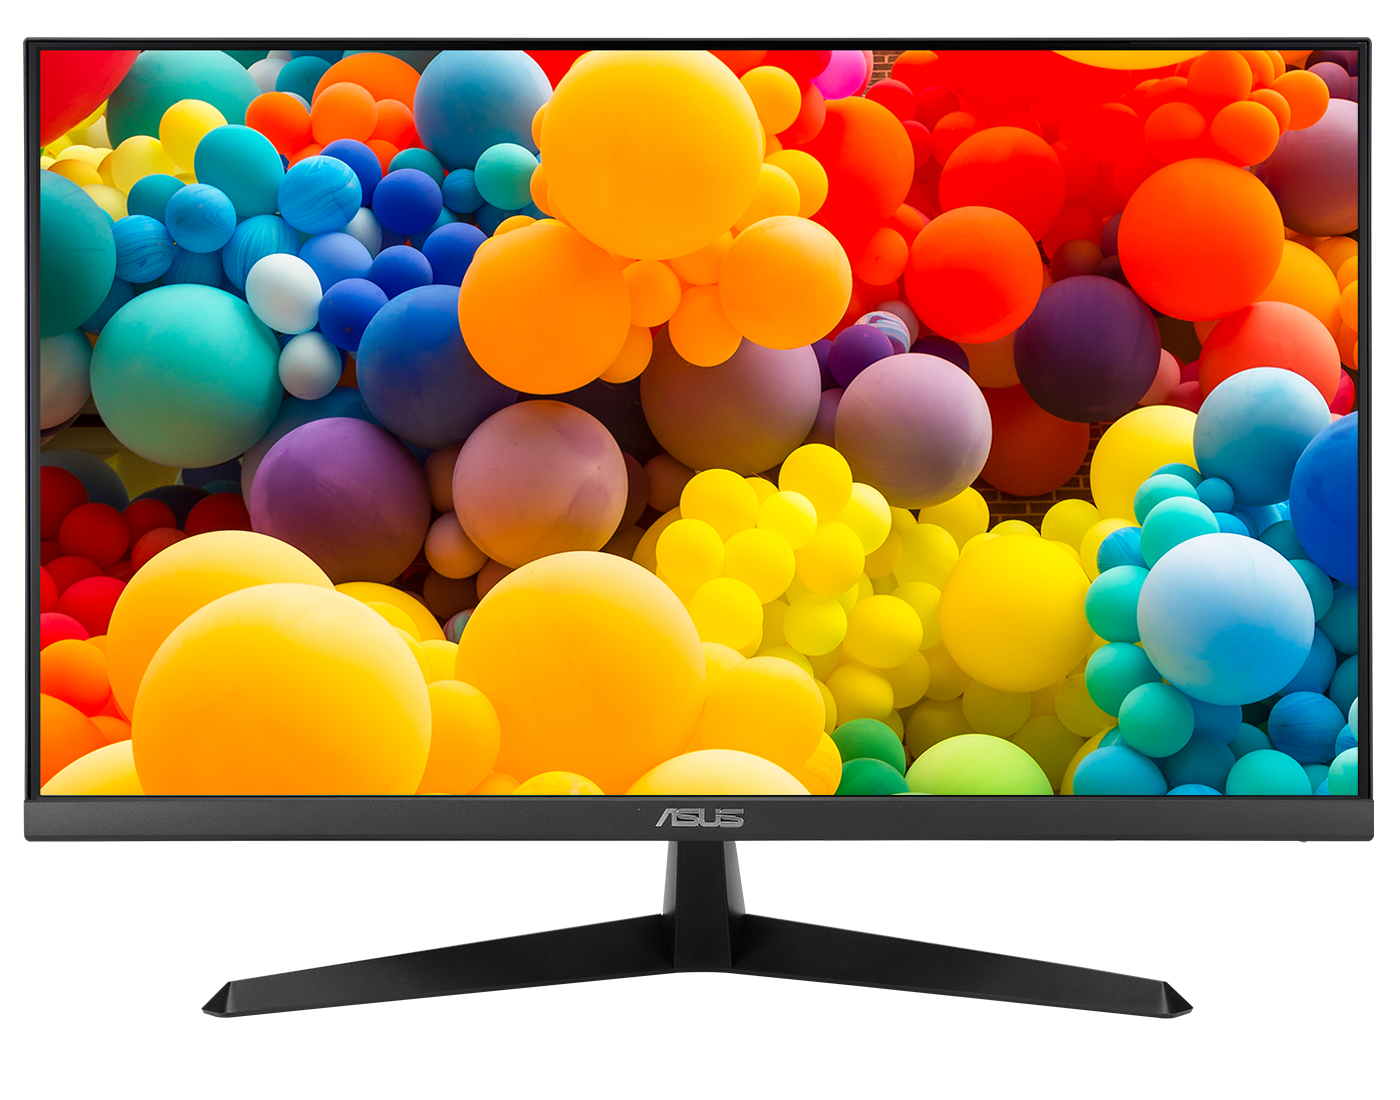 Monitor with 16.7 million colors with excellent image quality